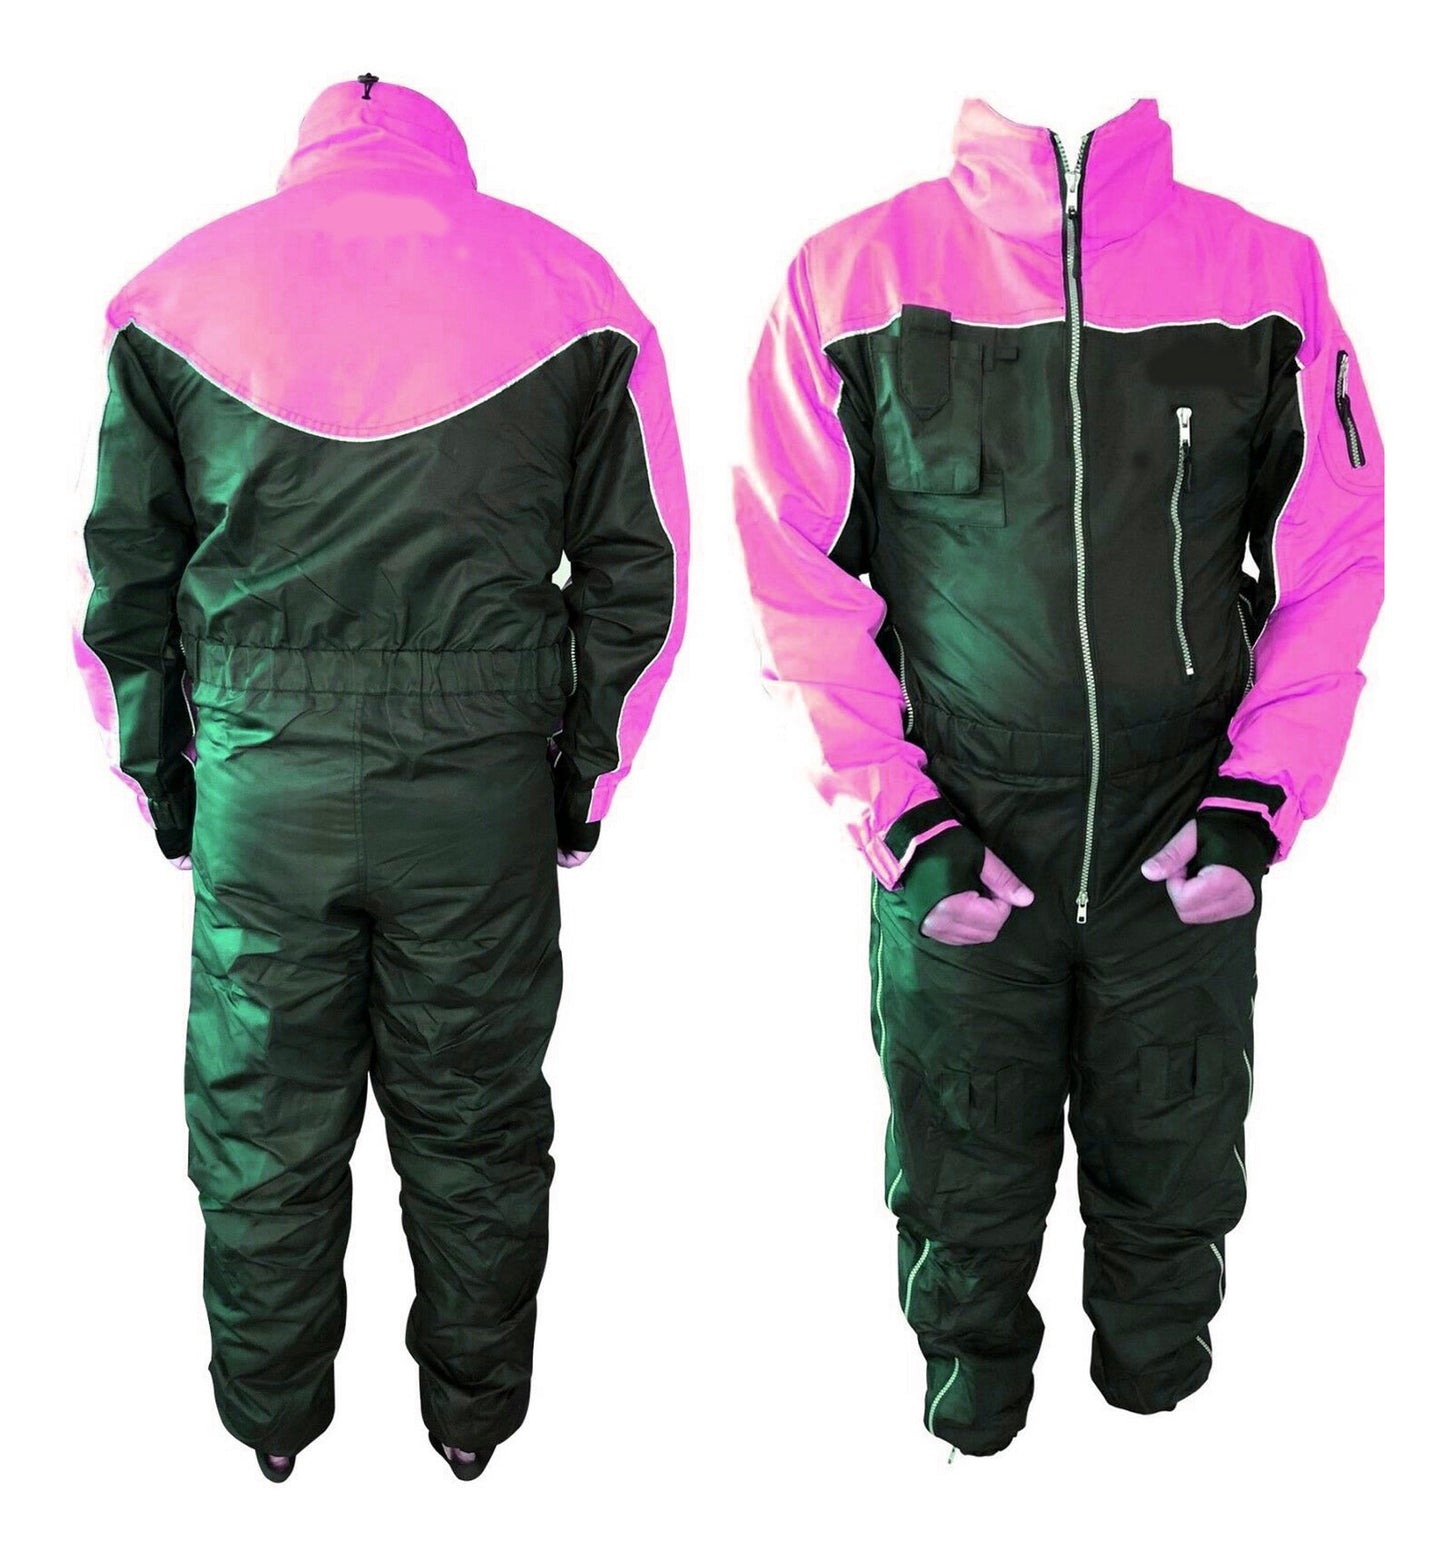 Paragliding High quality suit ZX-09